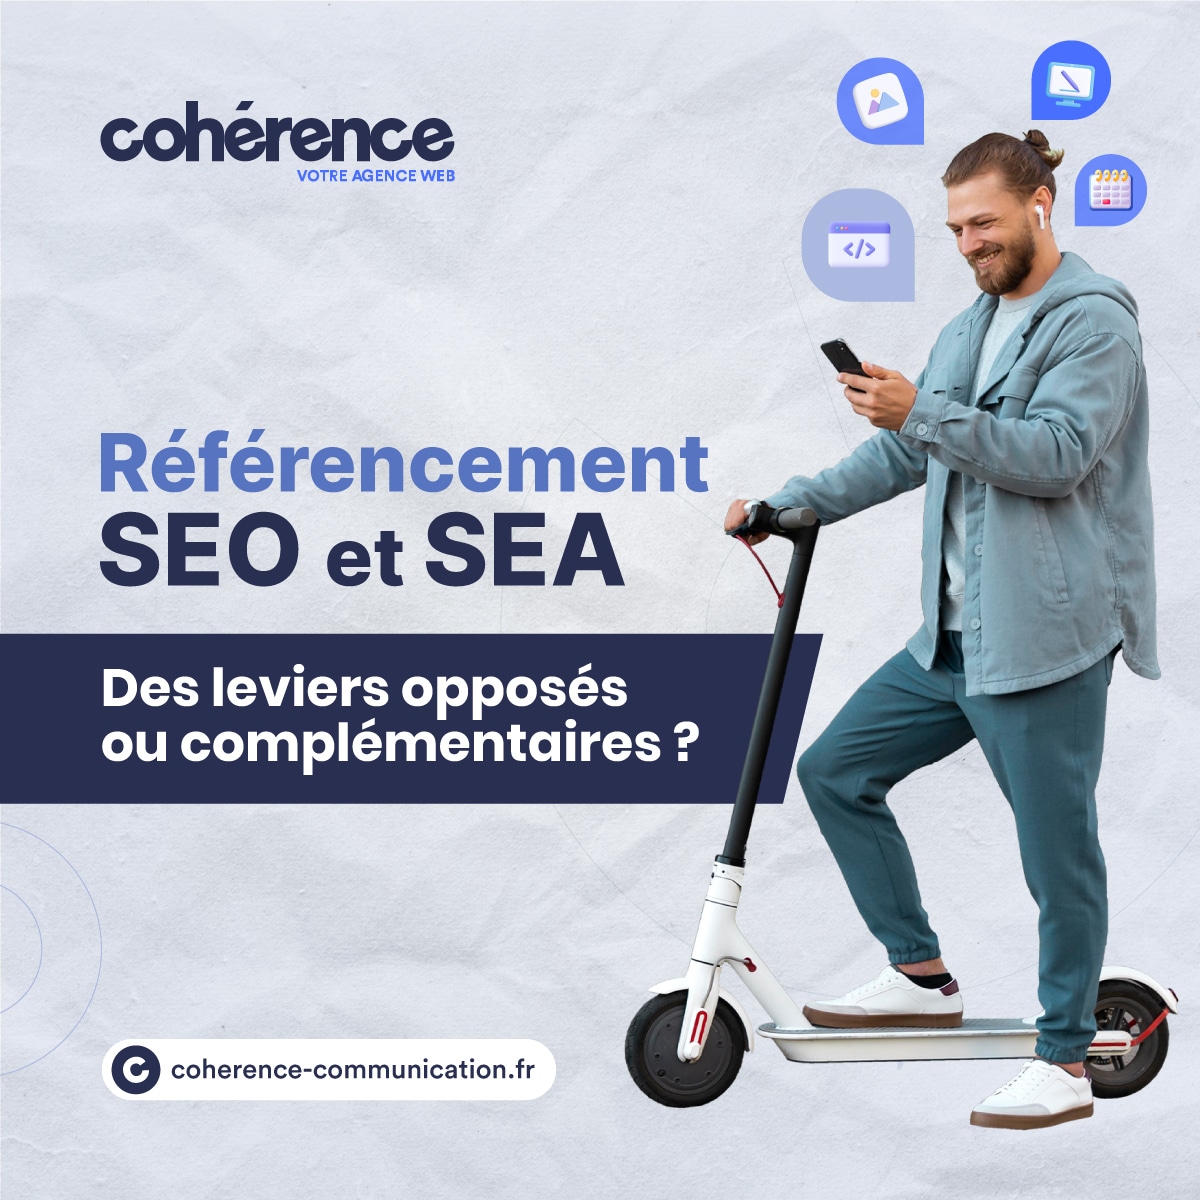 Coherence Agence Digitale Articles Post SEO Et SEA